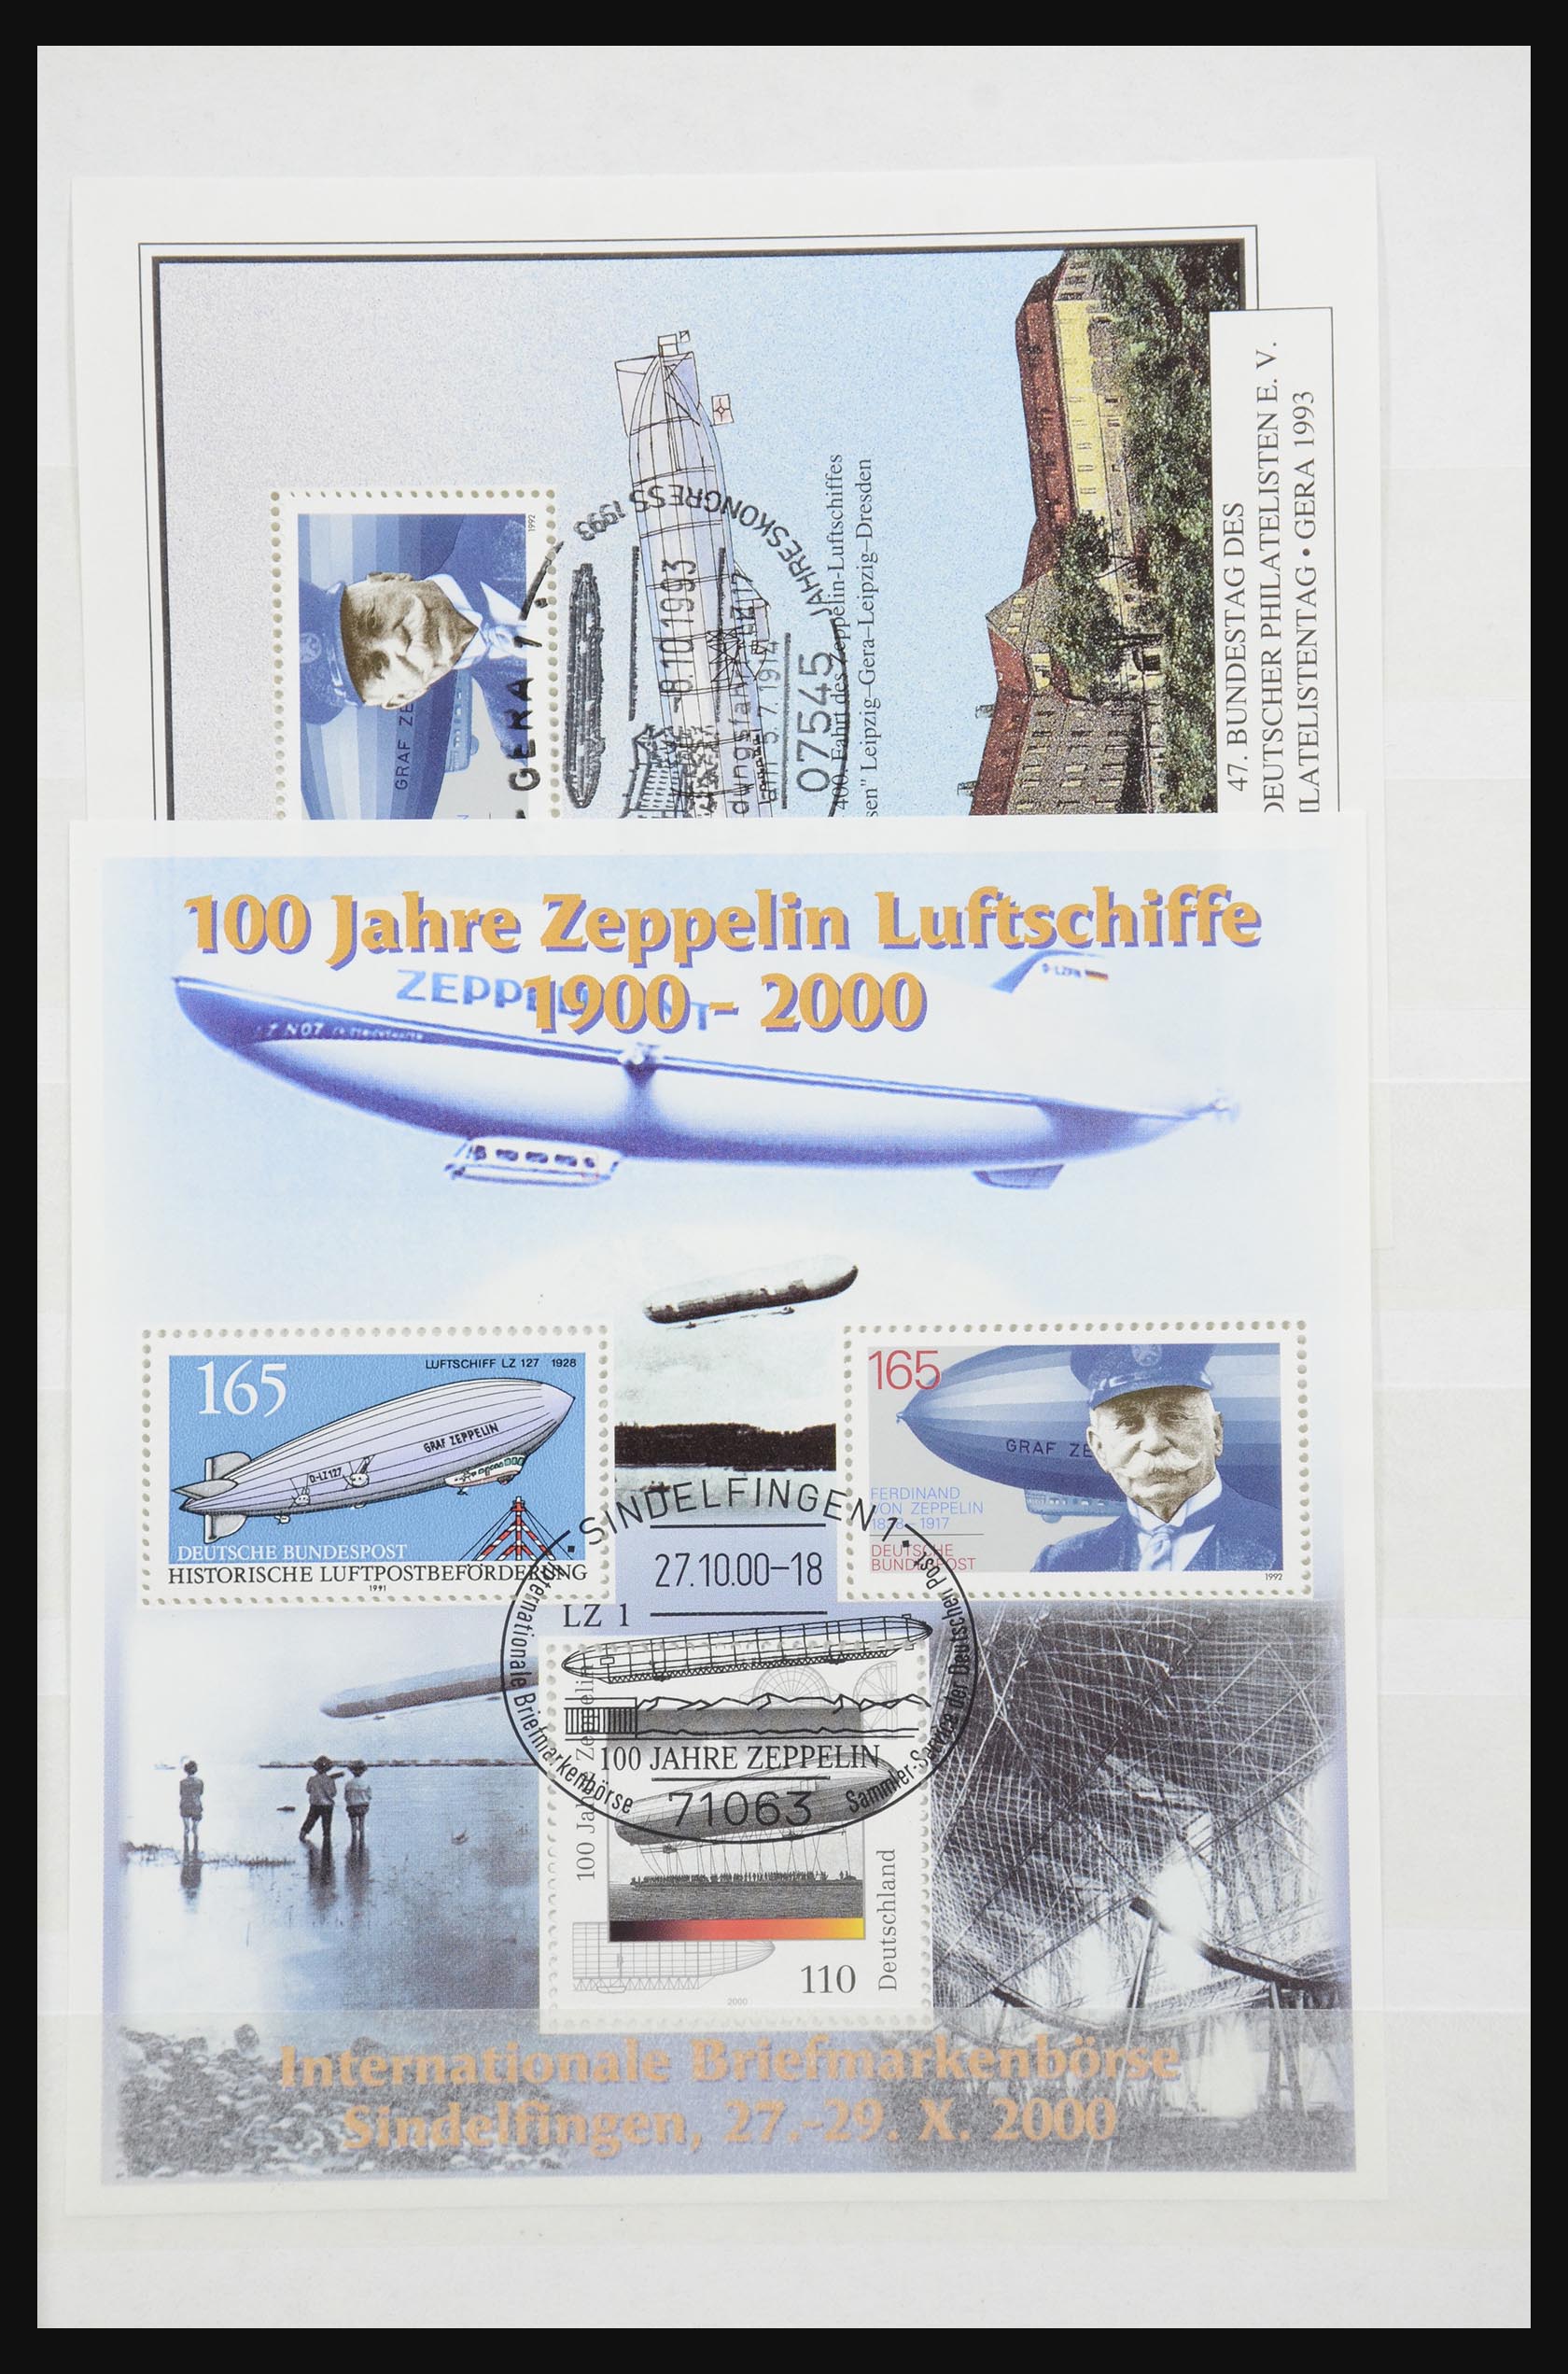 32050 039 - 32050 Bundespost special sheets 1980-2010.